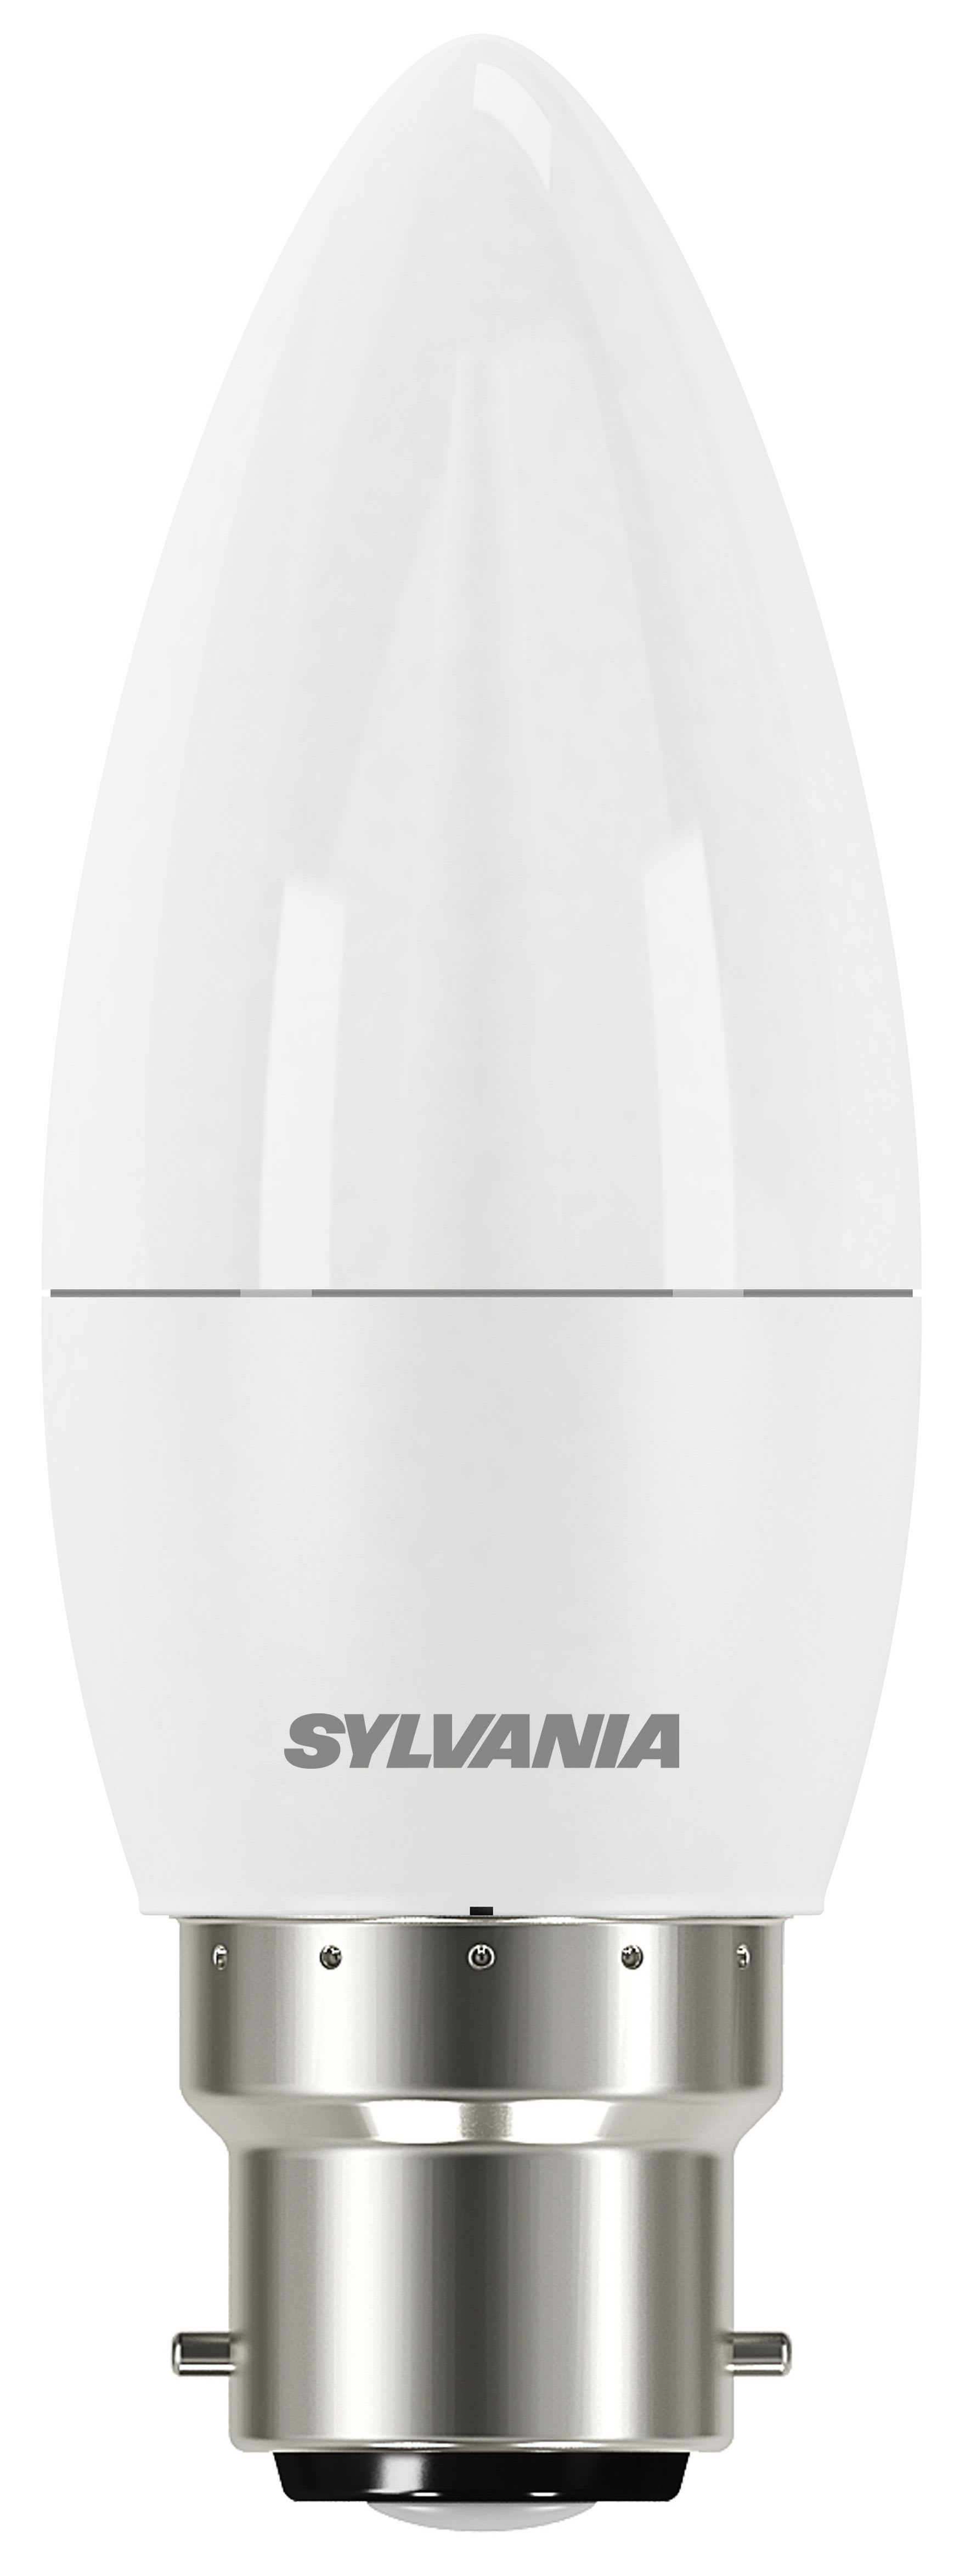 Sylvania LED Dimmable Frosted Candle B22 Light Bulb